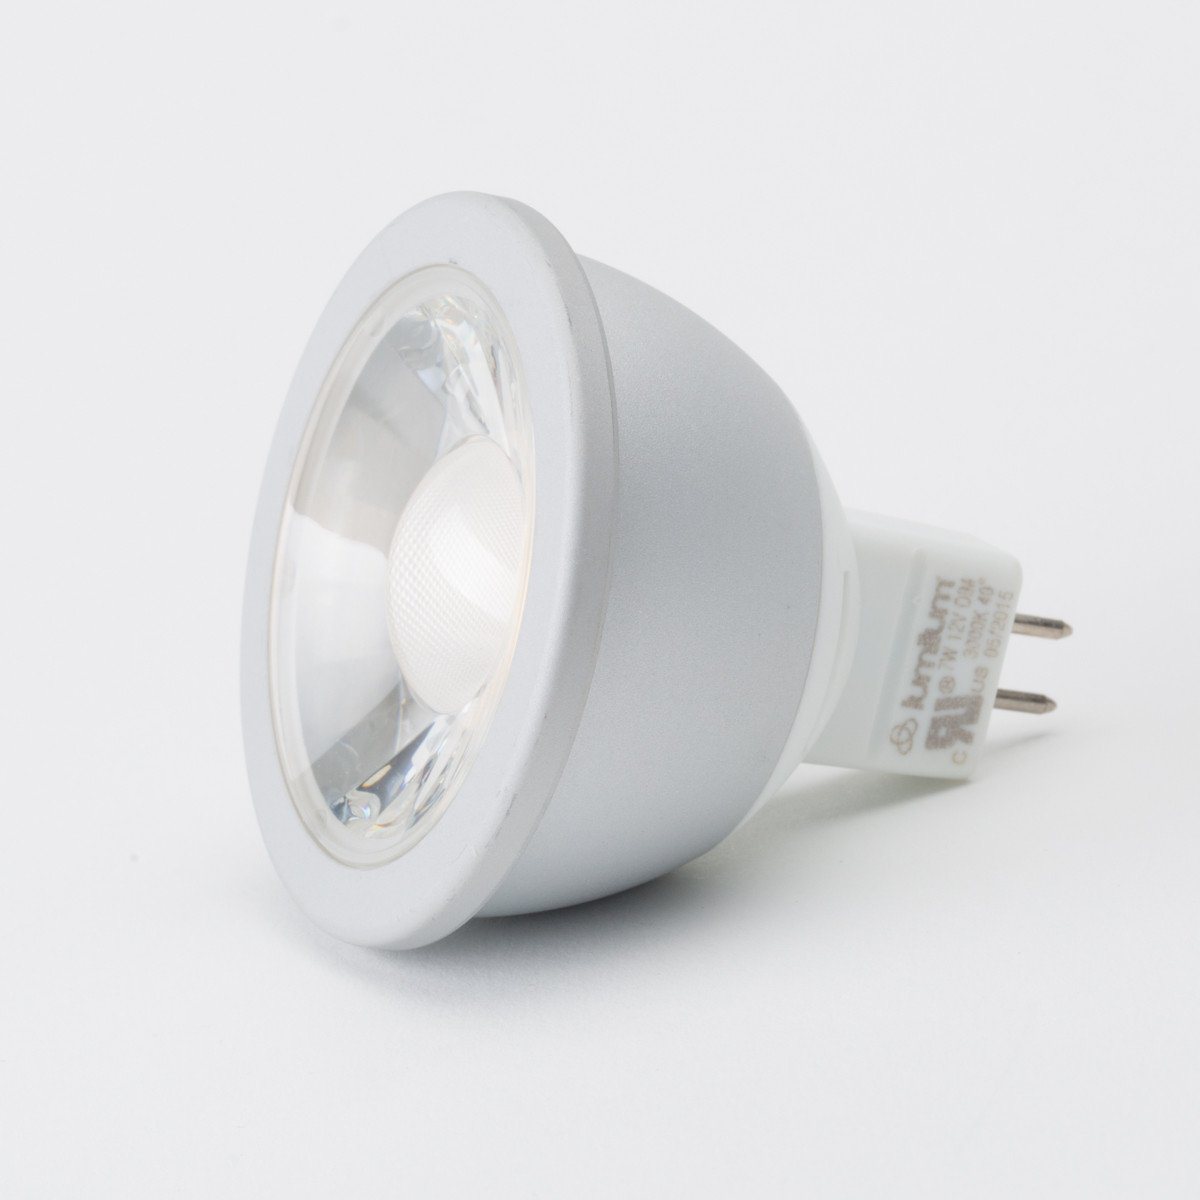 røre ved tunnel afsked MR16 Small LED Light Bulb | 12V | Dimmable - Lumilum